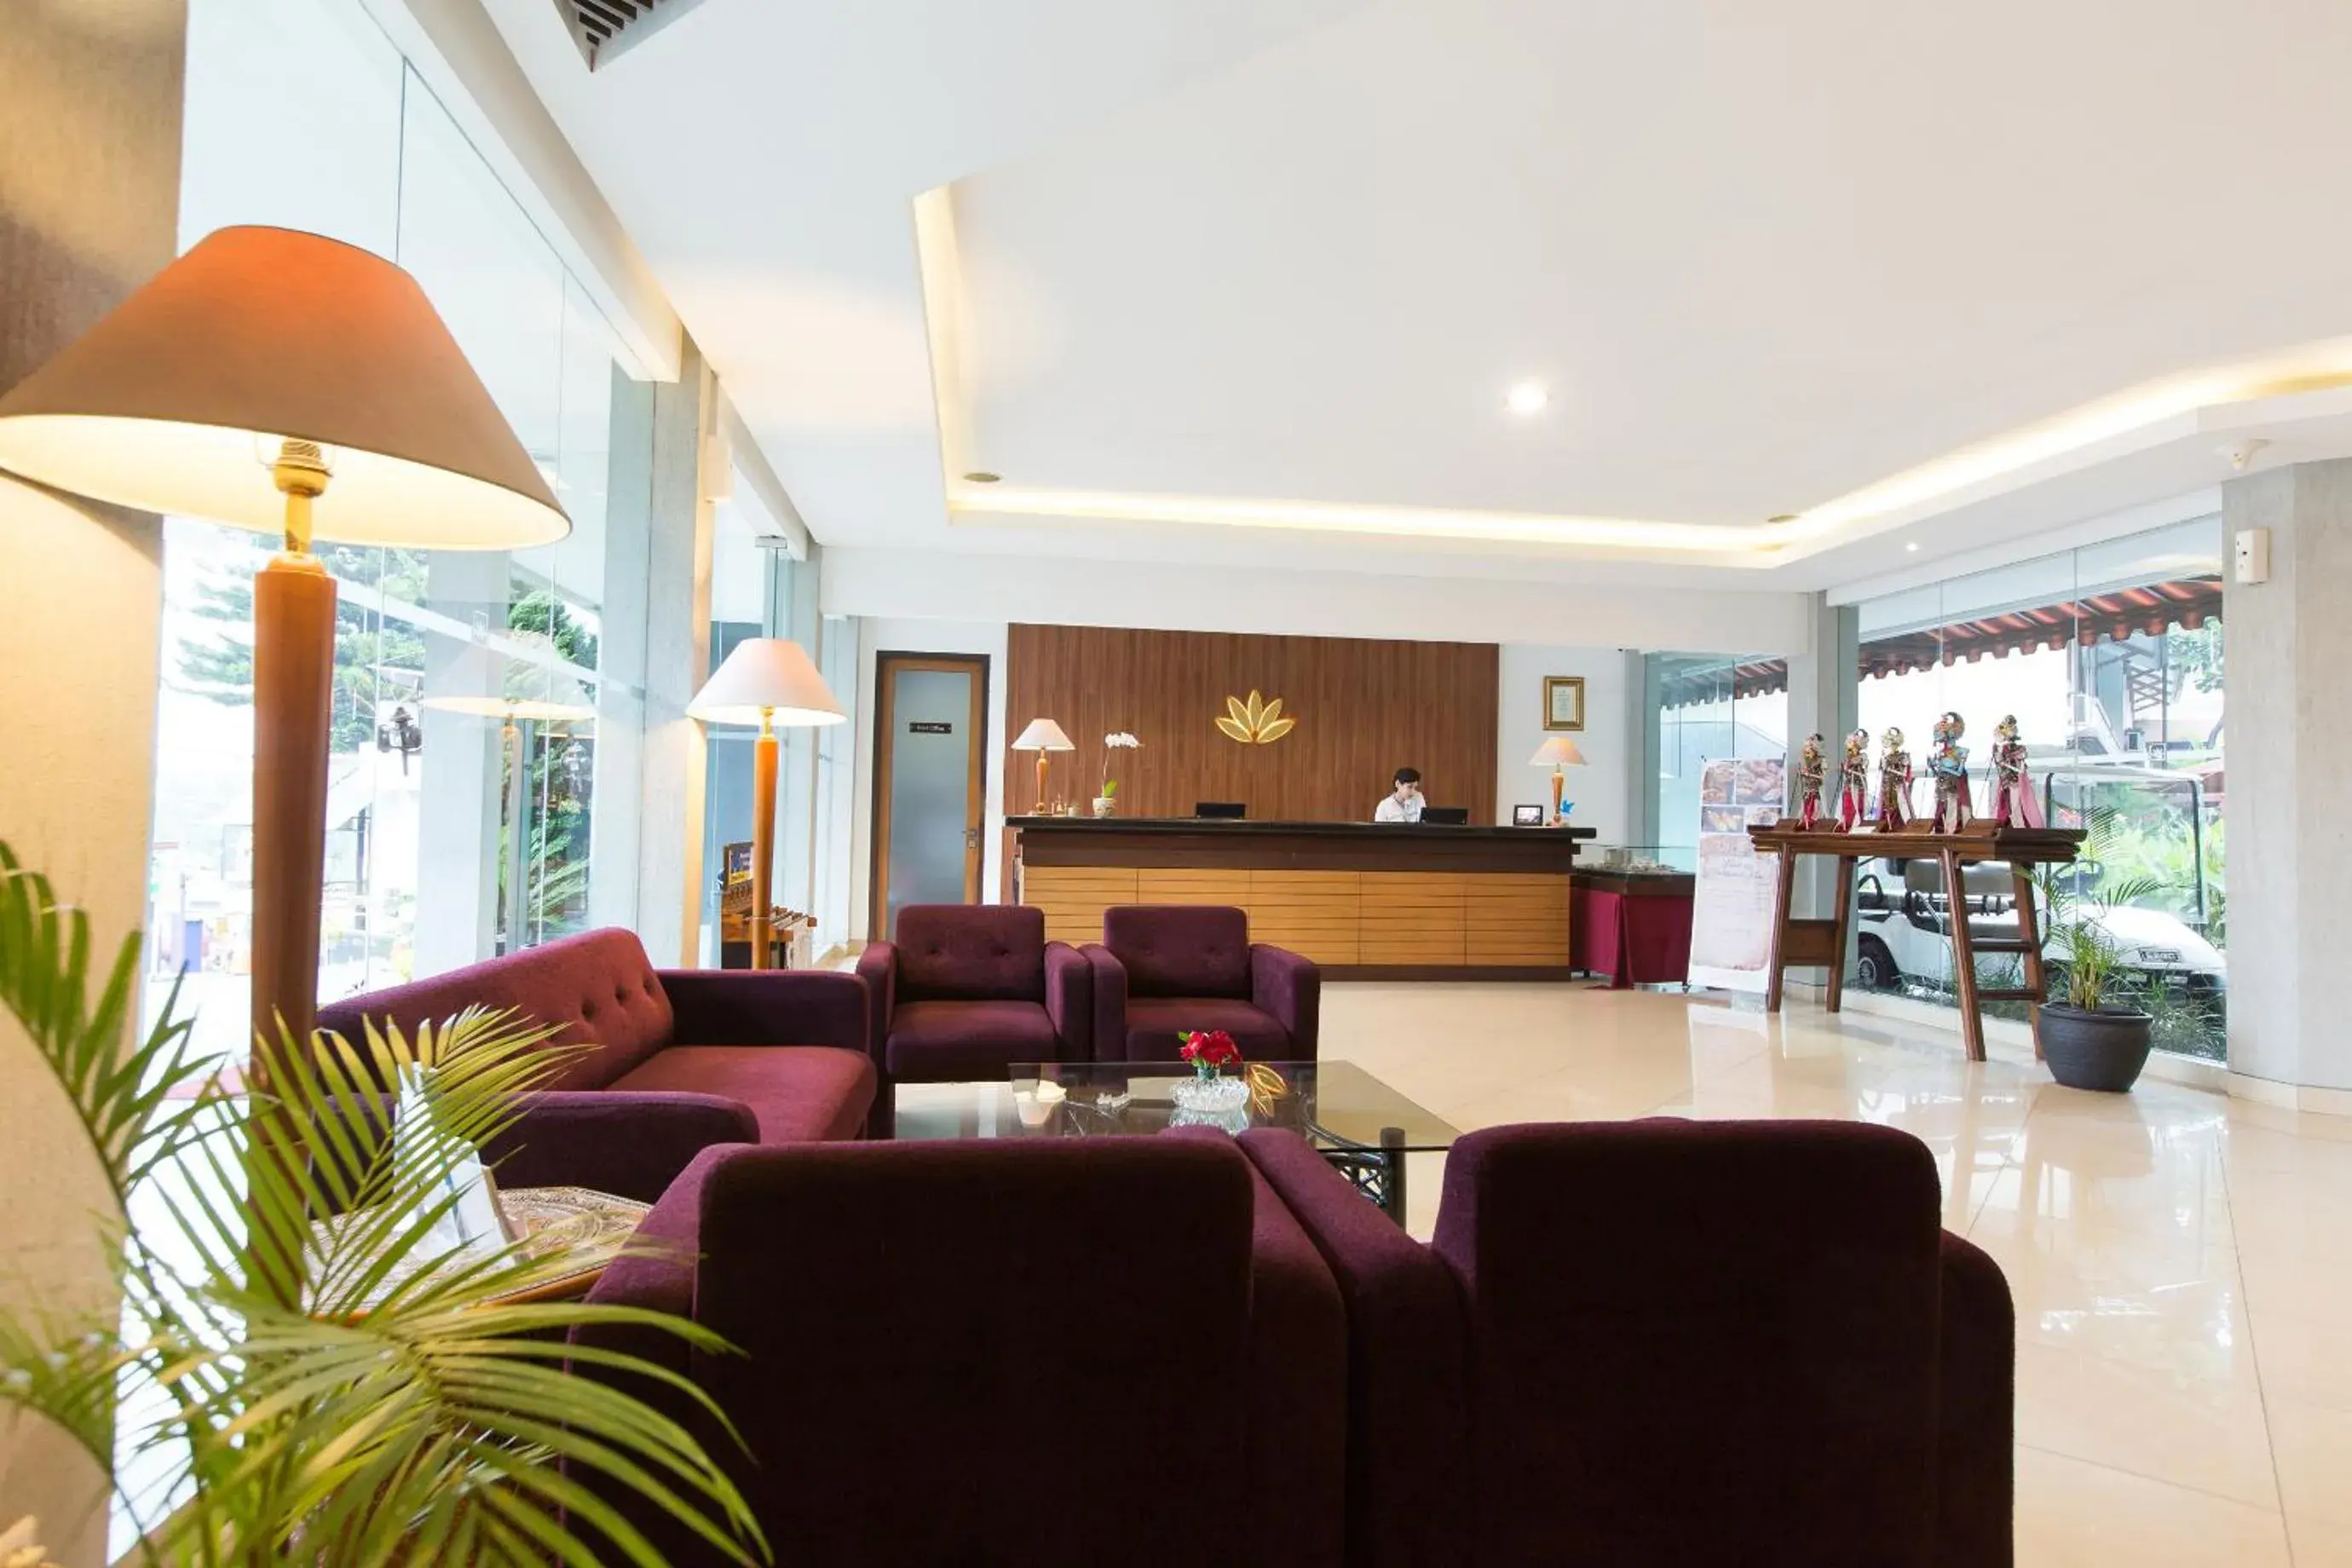 Lobby/Reception in Gumilang Regency Hotel by Gumilang Hospitality